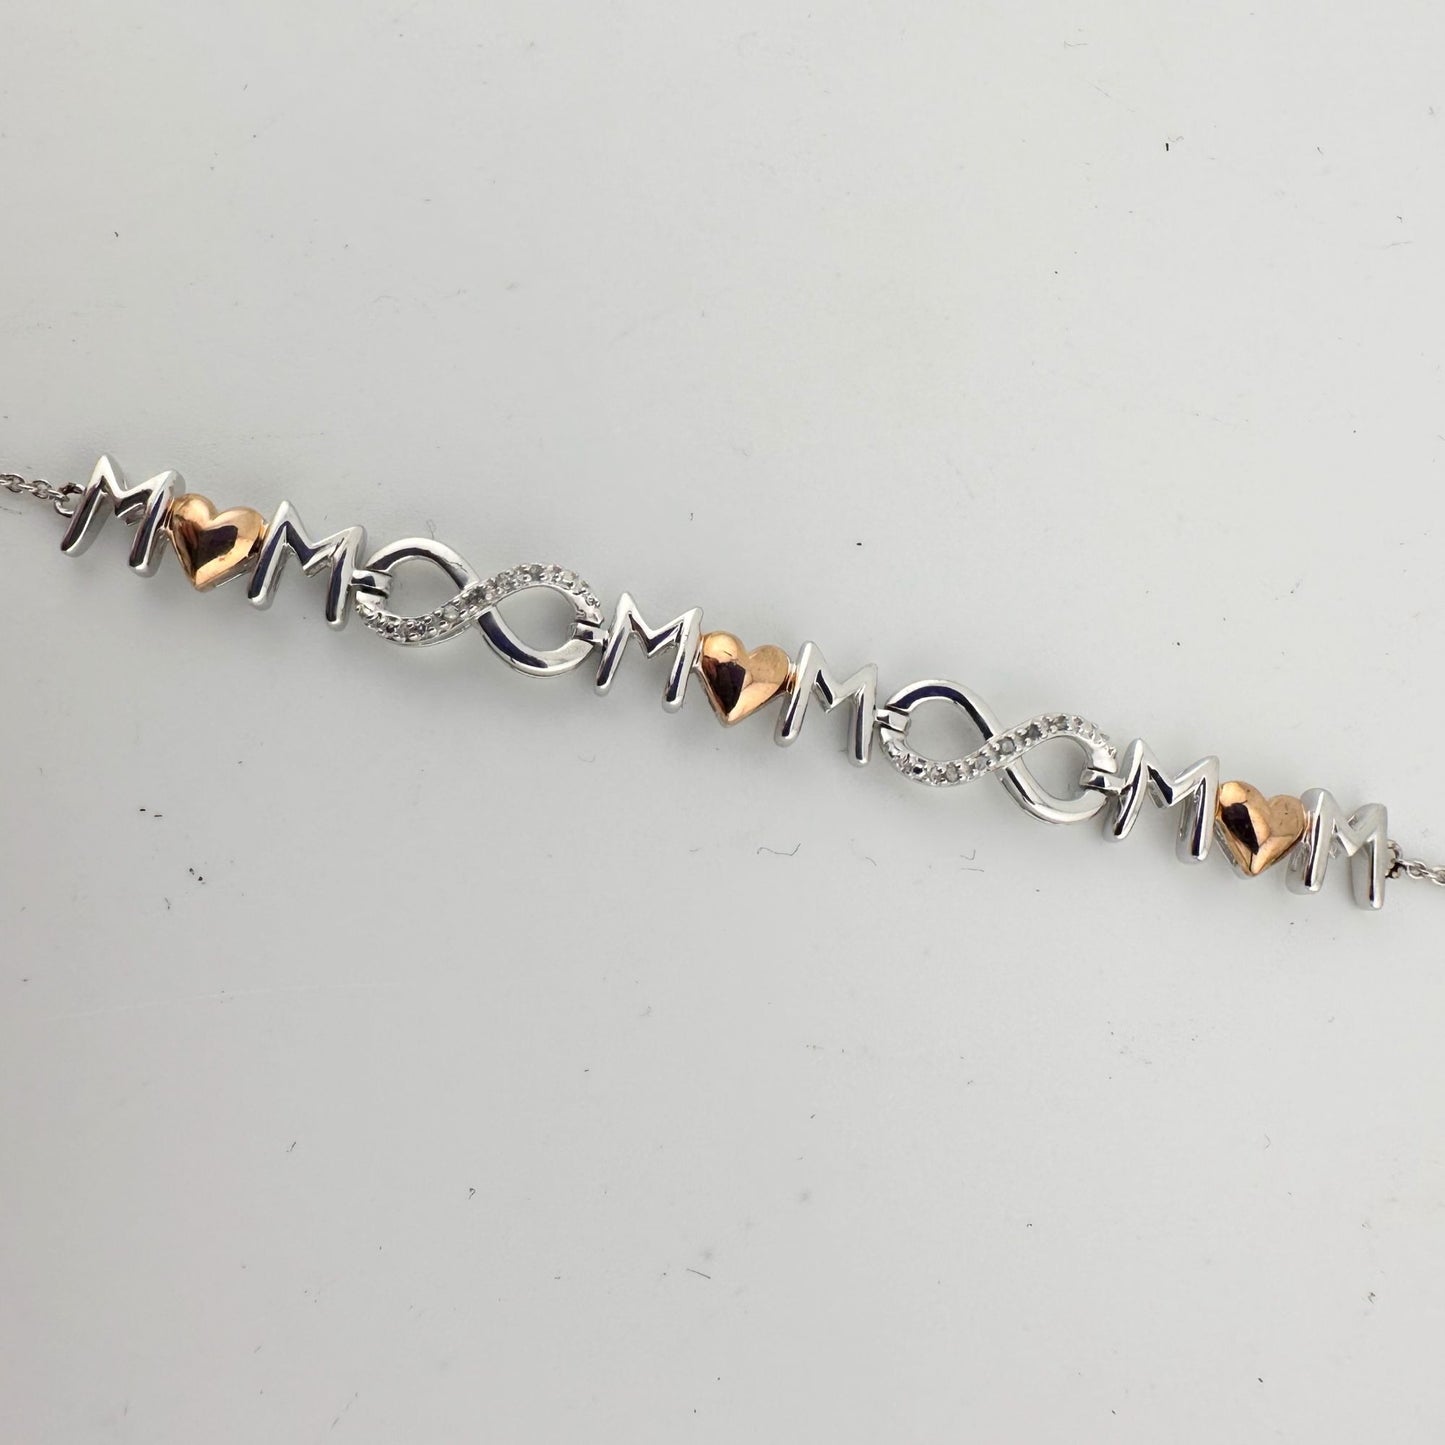 Sterling Silver "Mom" Bracelet with 14 kt gold Accent Hearts  & Infinity Symbols with Natural Diamonds